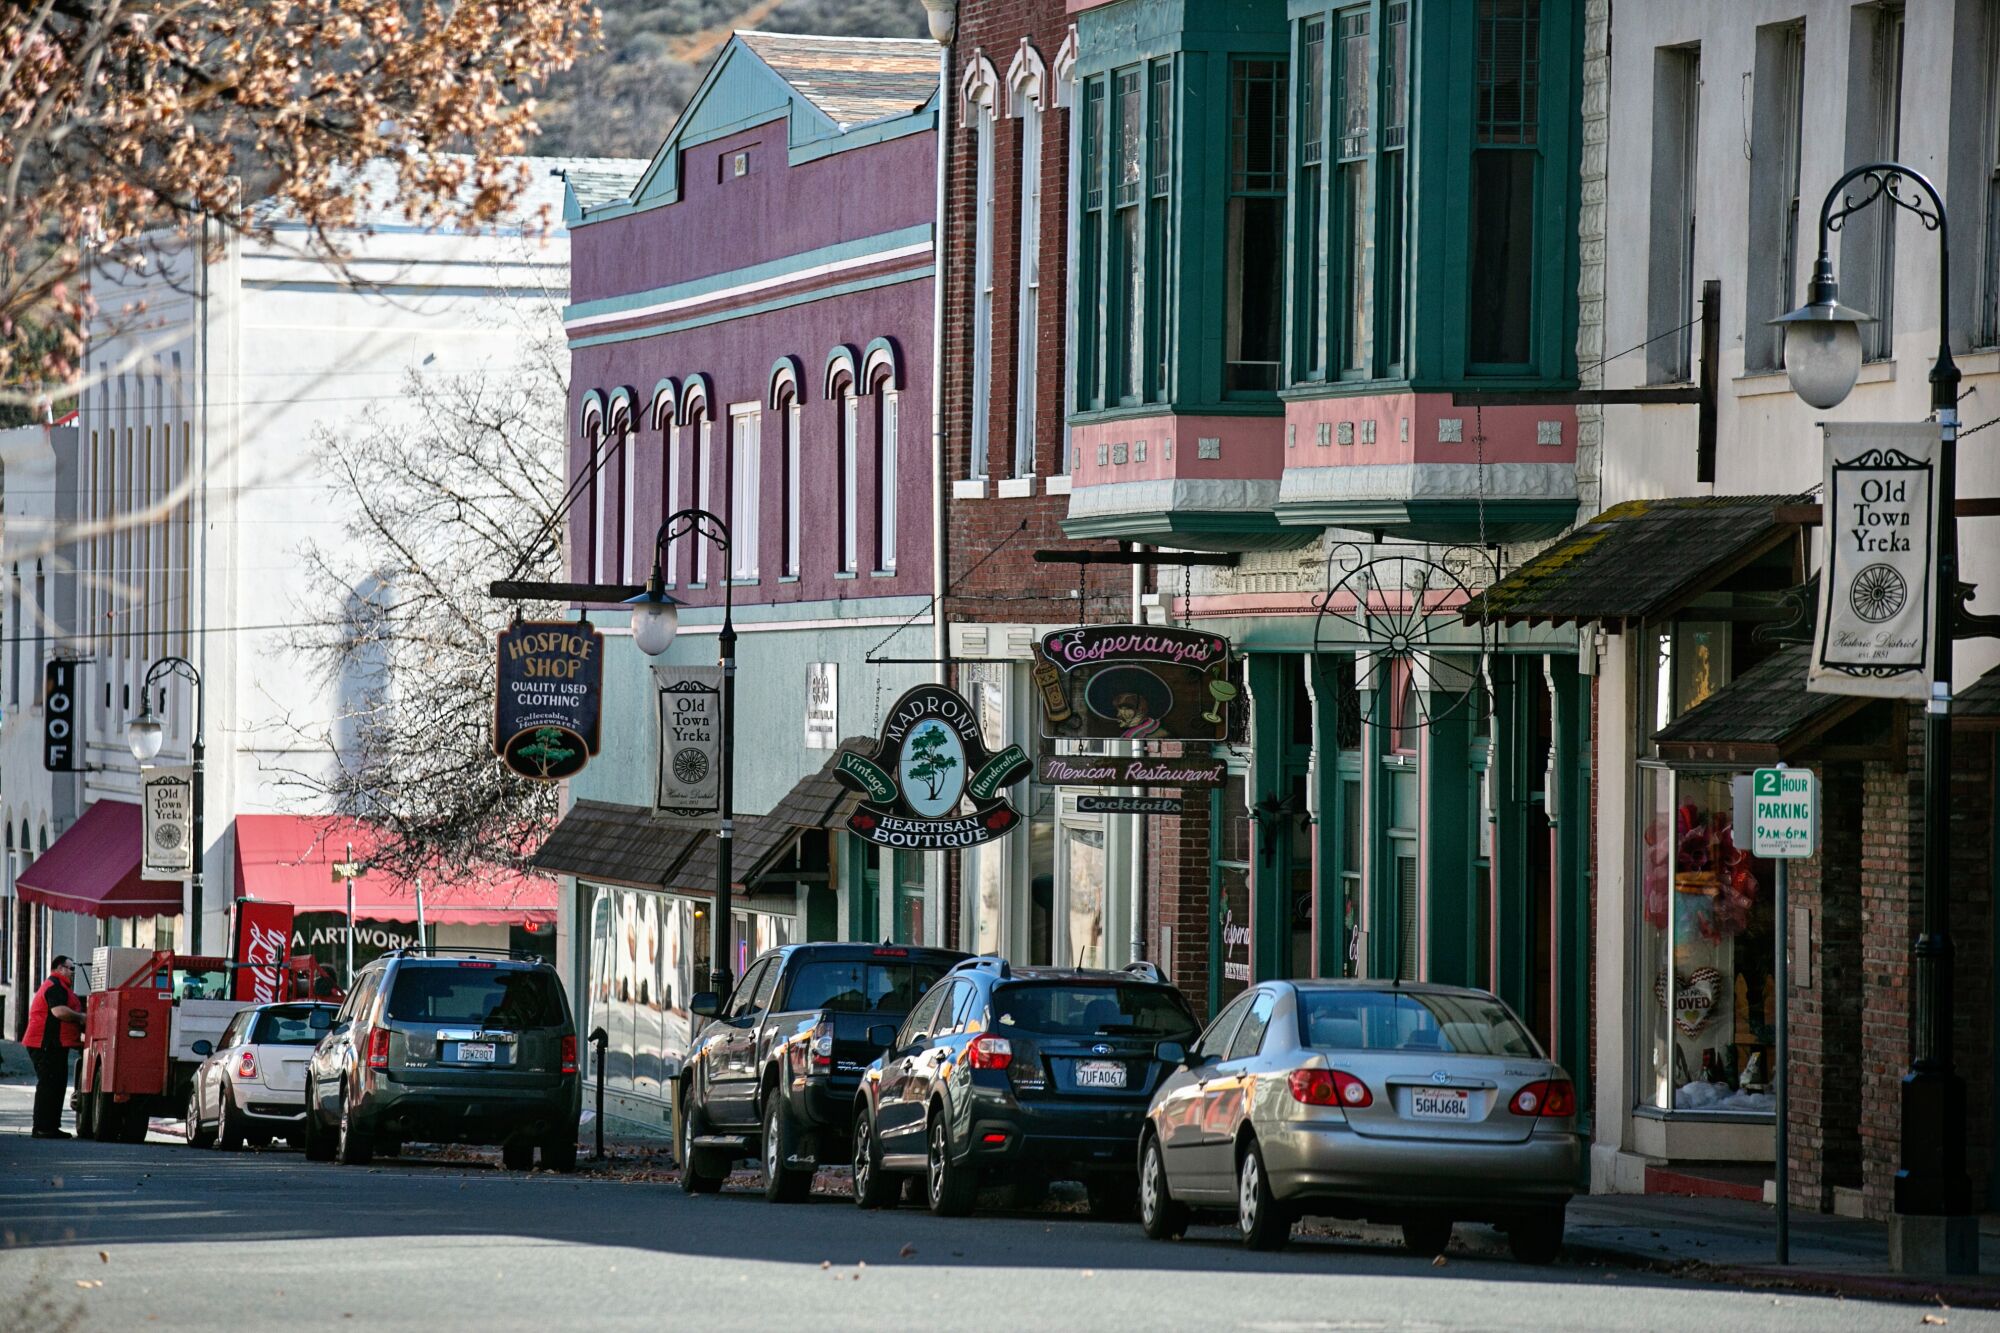 The business district in Historic Downtown Yreka in rural Northern California.